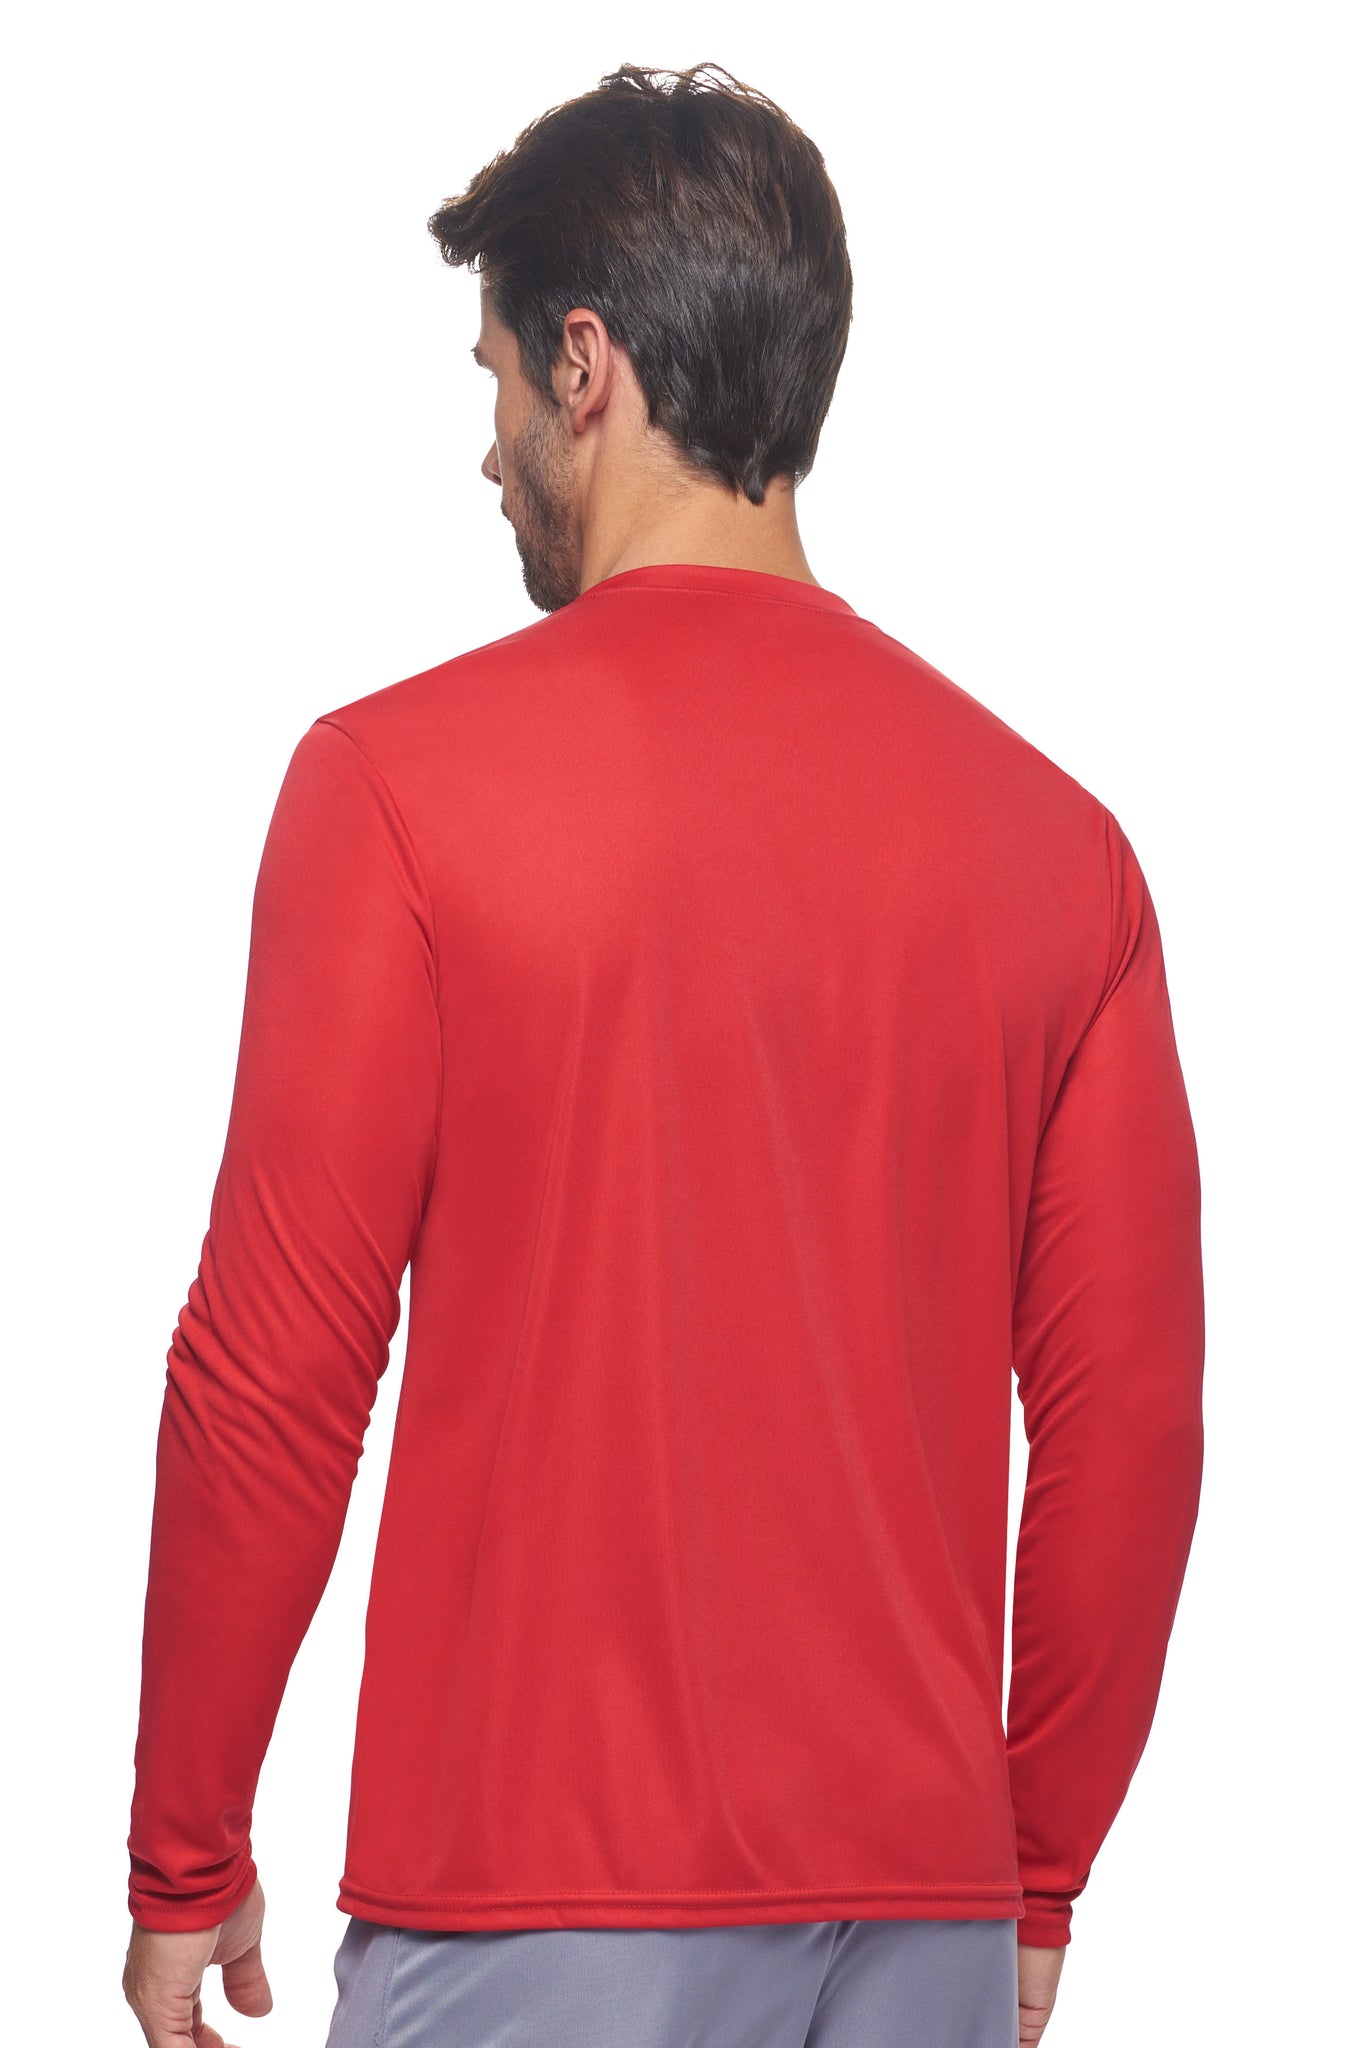 Expert Brand Wholesale Made in USA Activewear Performance Long Sleeve Expert Tee pk MaX™ Crewneck 3#red